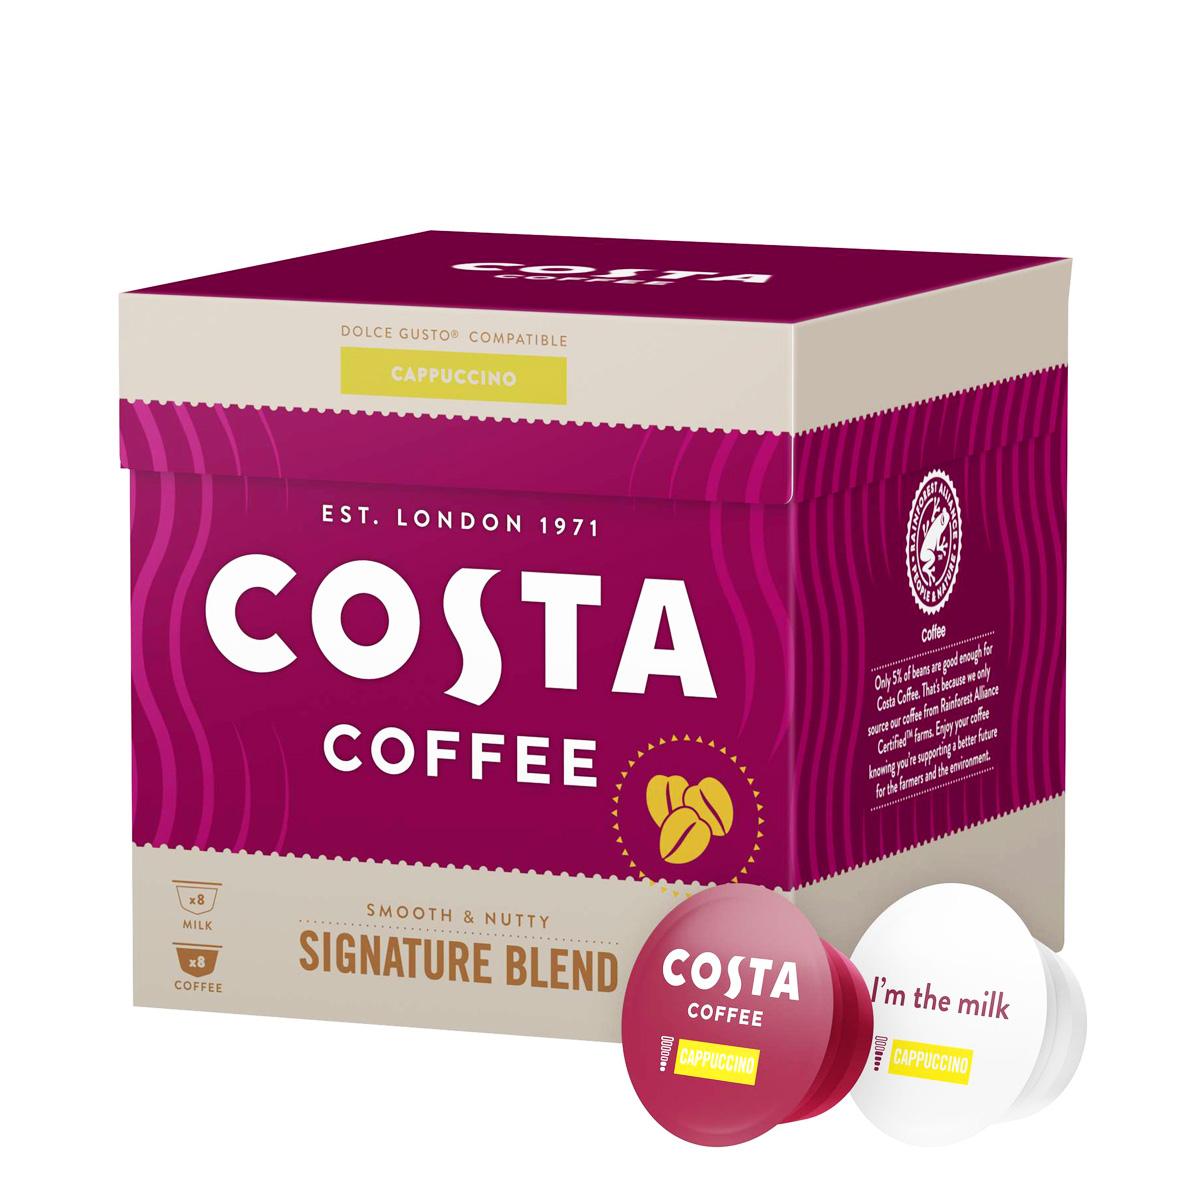 Selected image for COSTA COFFEE Dolce Gusto Kapsule Signature Blend Cappuccino 16/1